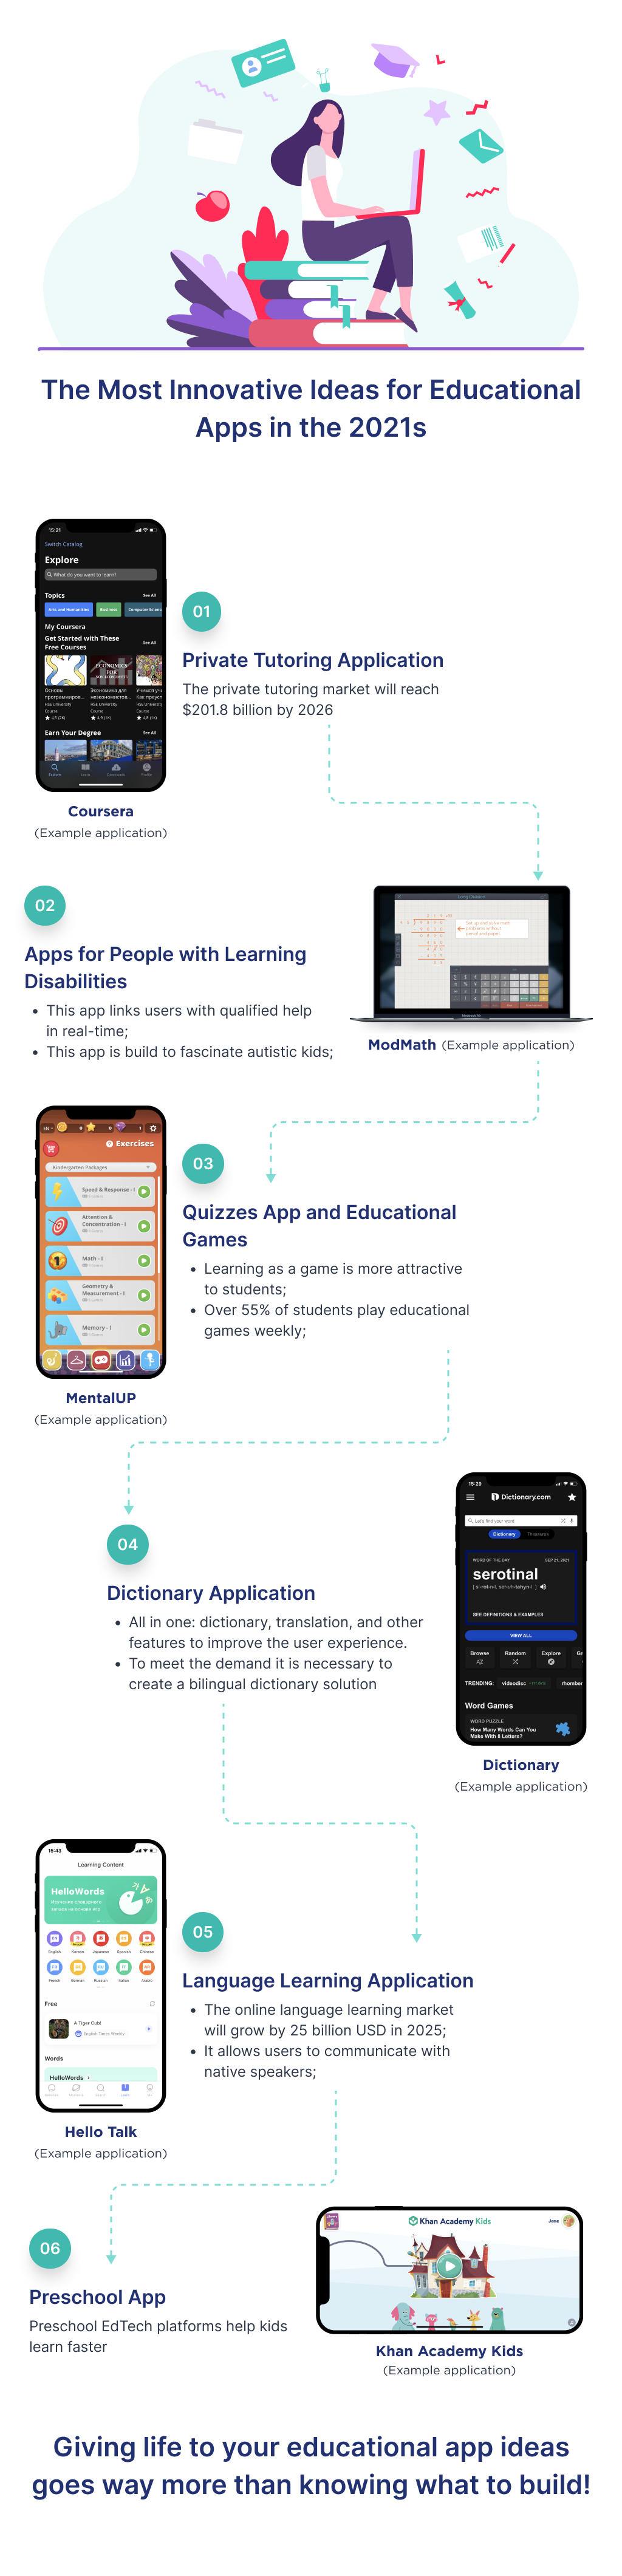 Innovative ideas that can be used to create an educational app in 2021